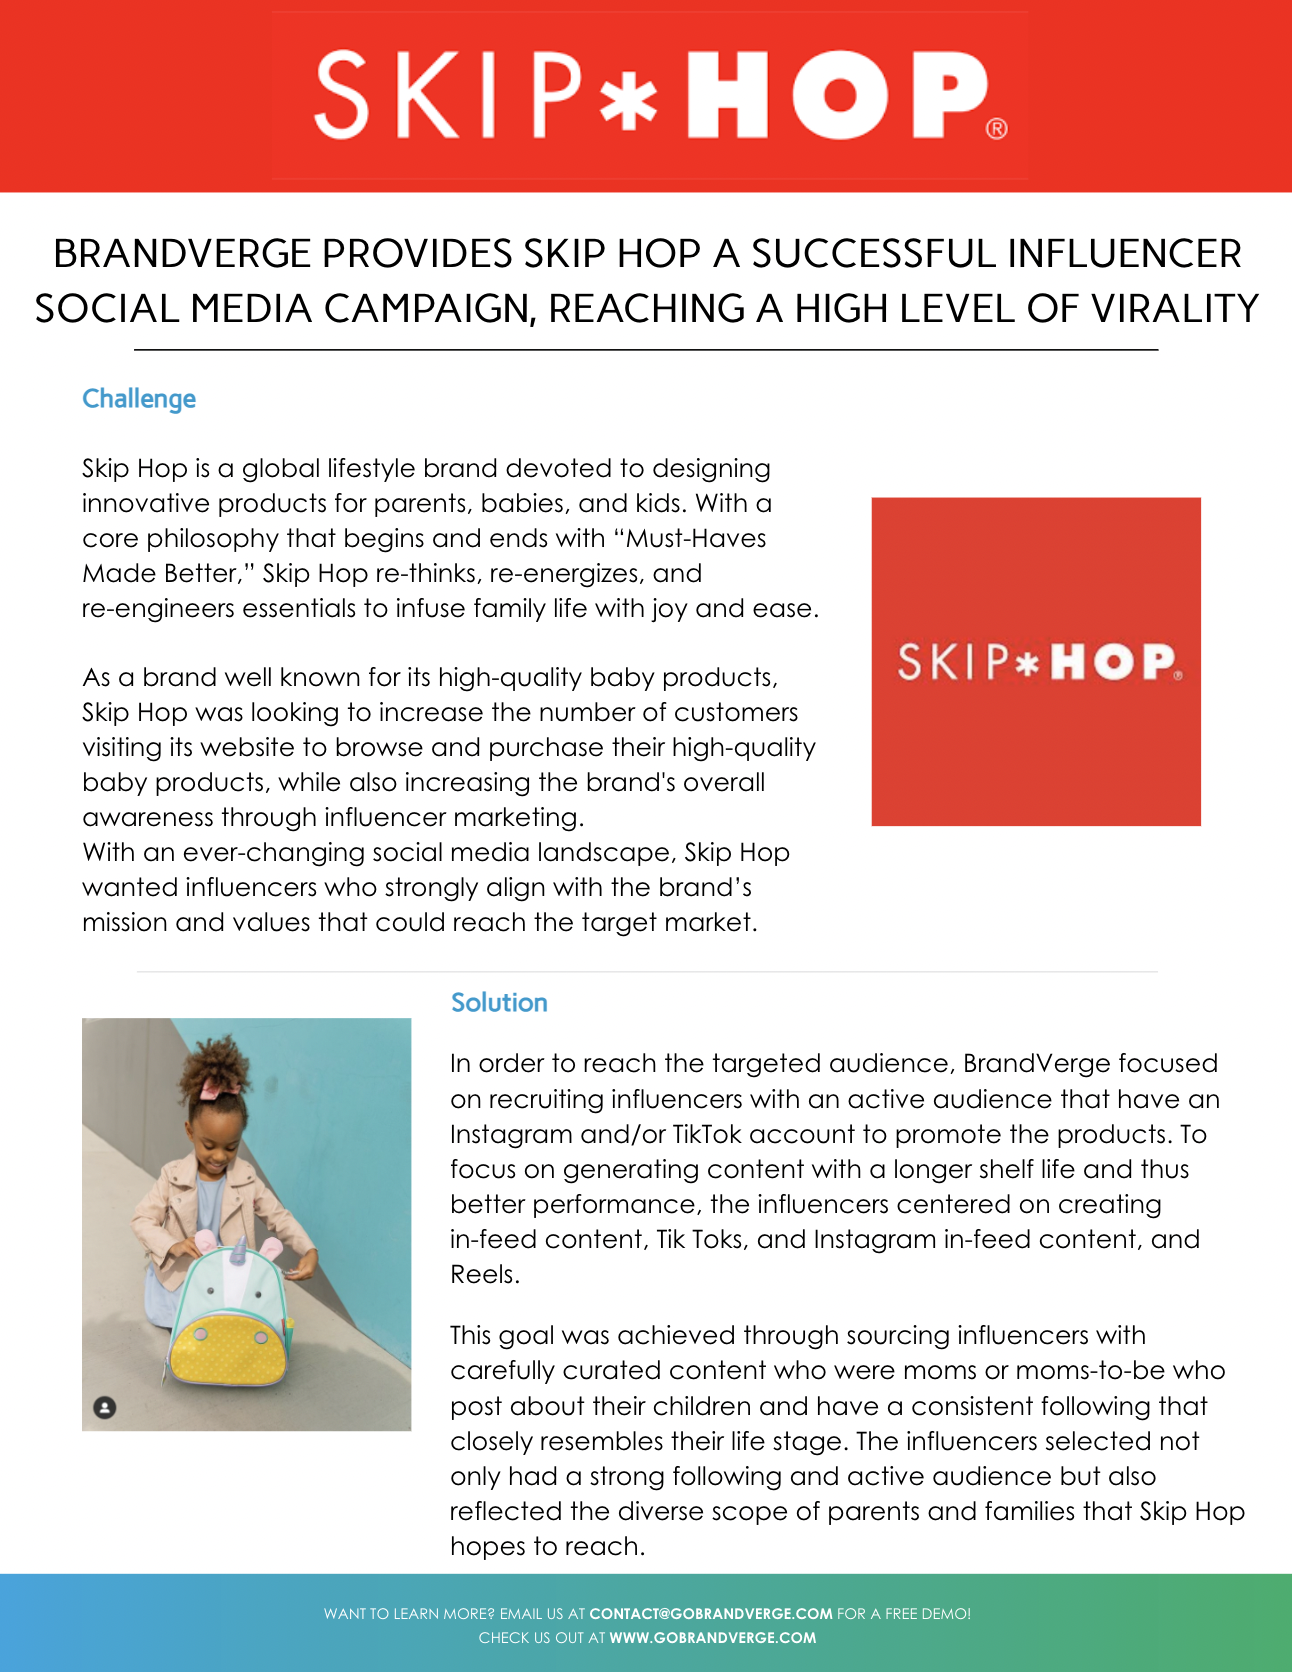 BRANDVERGE PROVIDES SKIP HOP A SUCCESSFUL INFLUENCER SOCIAL MEDIA CAMPAIGN, REACHING A HIGH LEVEL OF VIRALITY